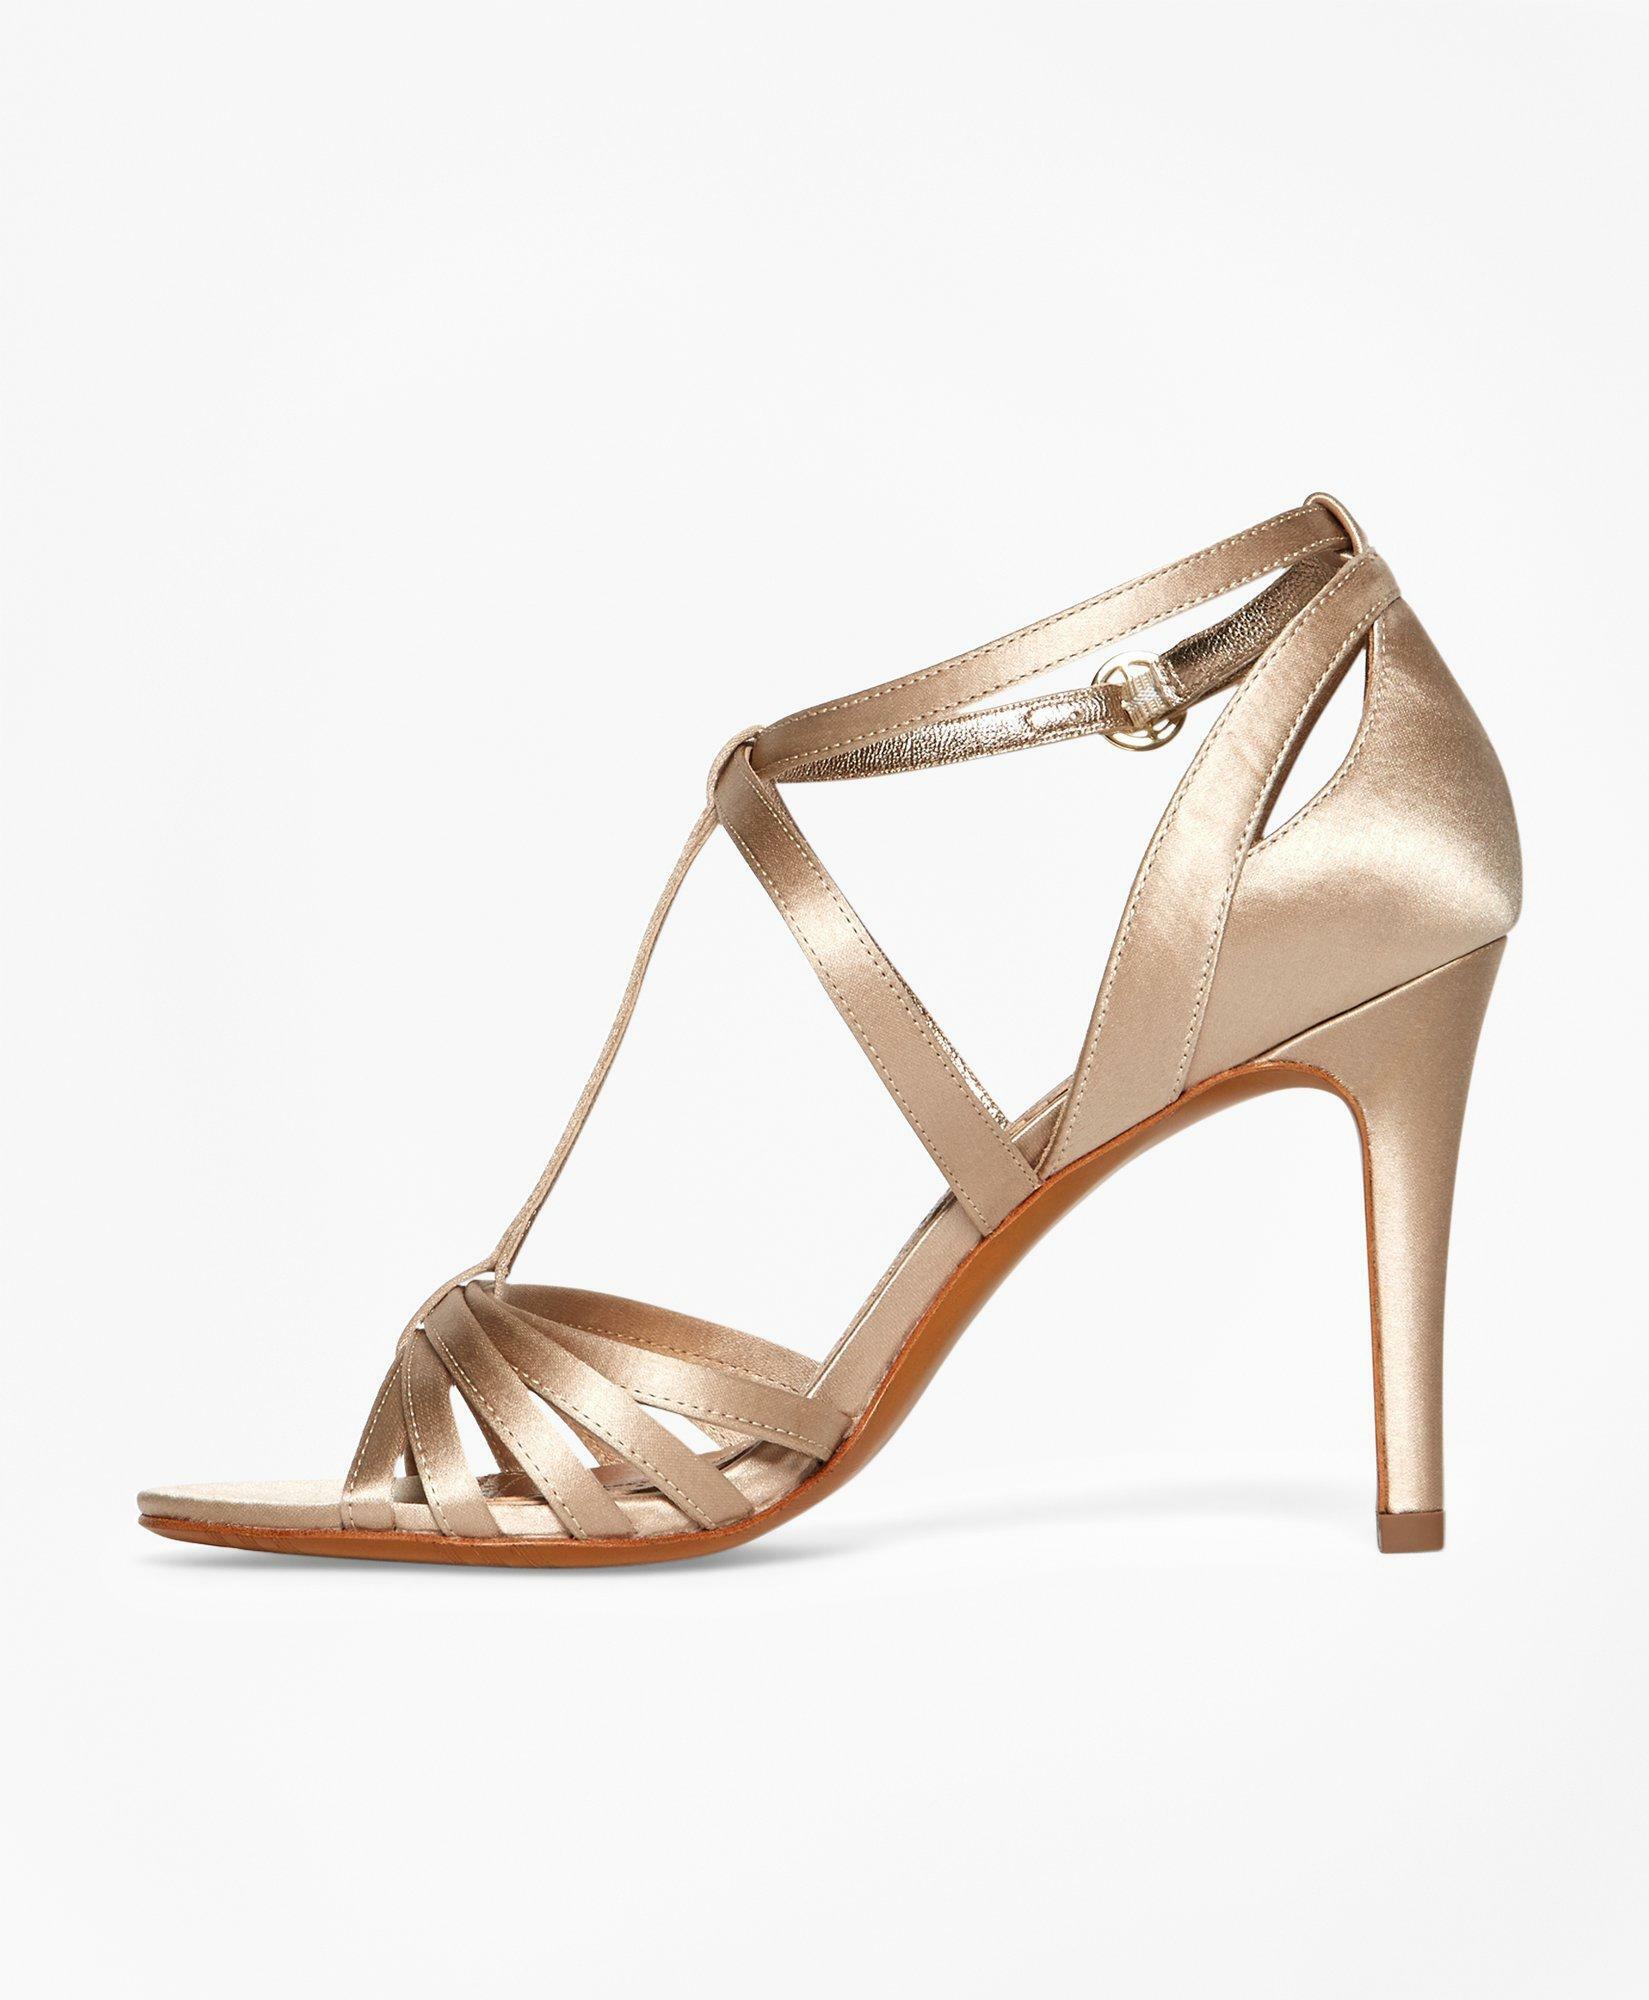 Brooks Brothers Women's Satin High-Heeled Sandals Shoes | Champagne